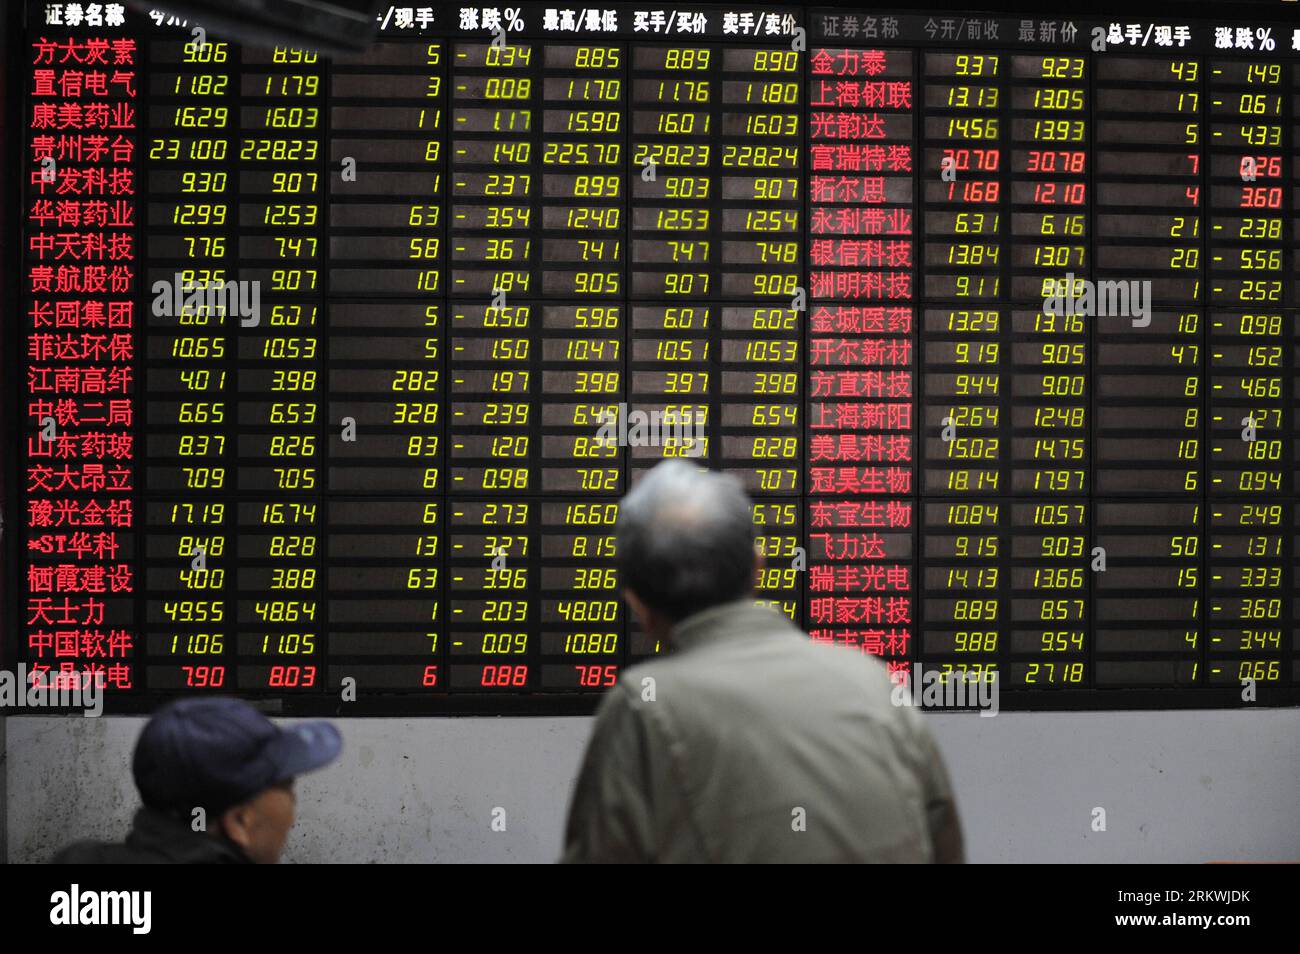 Bildnummer: 58696473  Datum: 13.11.2012  Copyright: imago/Xinhua (121113) -- HANGZHOU, Nov. 13, 2012 (Xinhua) -- Investors look at the stock price monitor at a stock trading hall in Hangzhou, capital of east China s Zhejiang Province, Nov. 13, 2012. Chinese stocks experienced a decline on Tuesday. The benchmark Shanghai Composite Index dropped 1.51 percent, to close at 2,047.89 points. The Shenzhen Component Index ended at 8,234.60 points, down 1.87 percent. (Xinhua/Ju Huanzong) (zc) CHINA-STOCKS-DOWN (CN) PUBLICATIONxNOTxINxCHN Wirtschaft Börse Kurs Aktien Aktienkurs Börsenkurs x0x xdd 2012 q Stock Photo